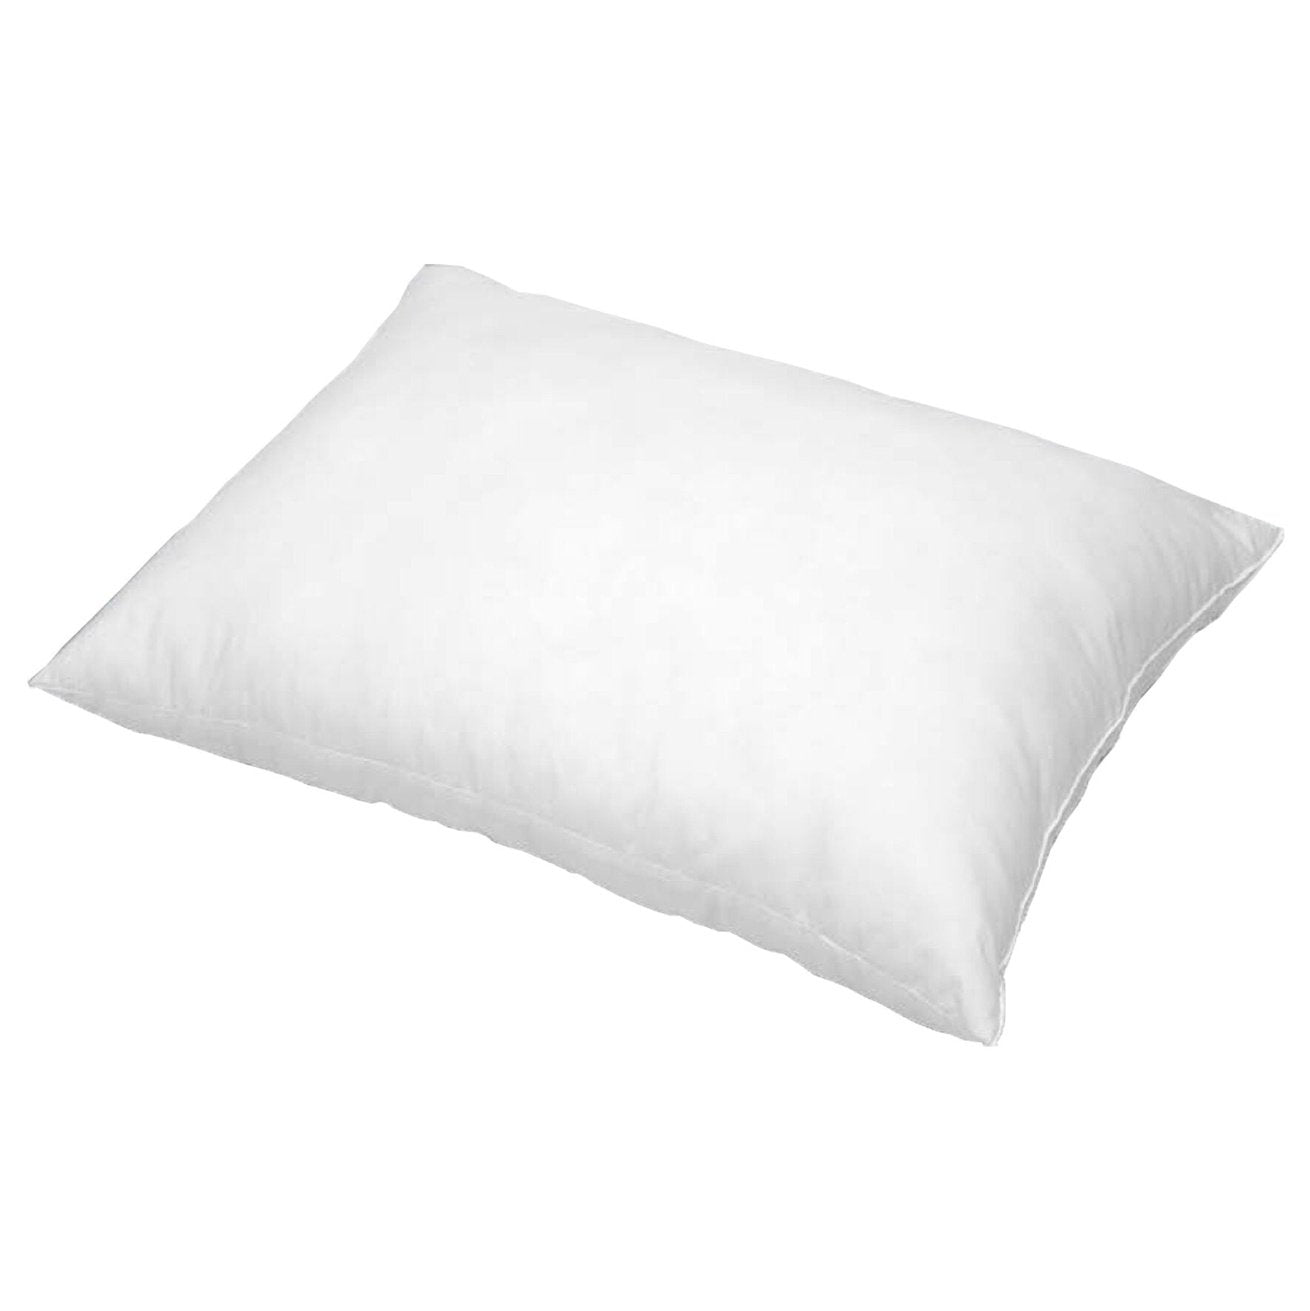 Bed-N-Bath Hollow Siliconized Polyester Fiber Pillow | Supply Master | Accra, Ghana Home Accessories Buy Tools hardware Building materials